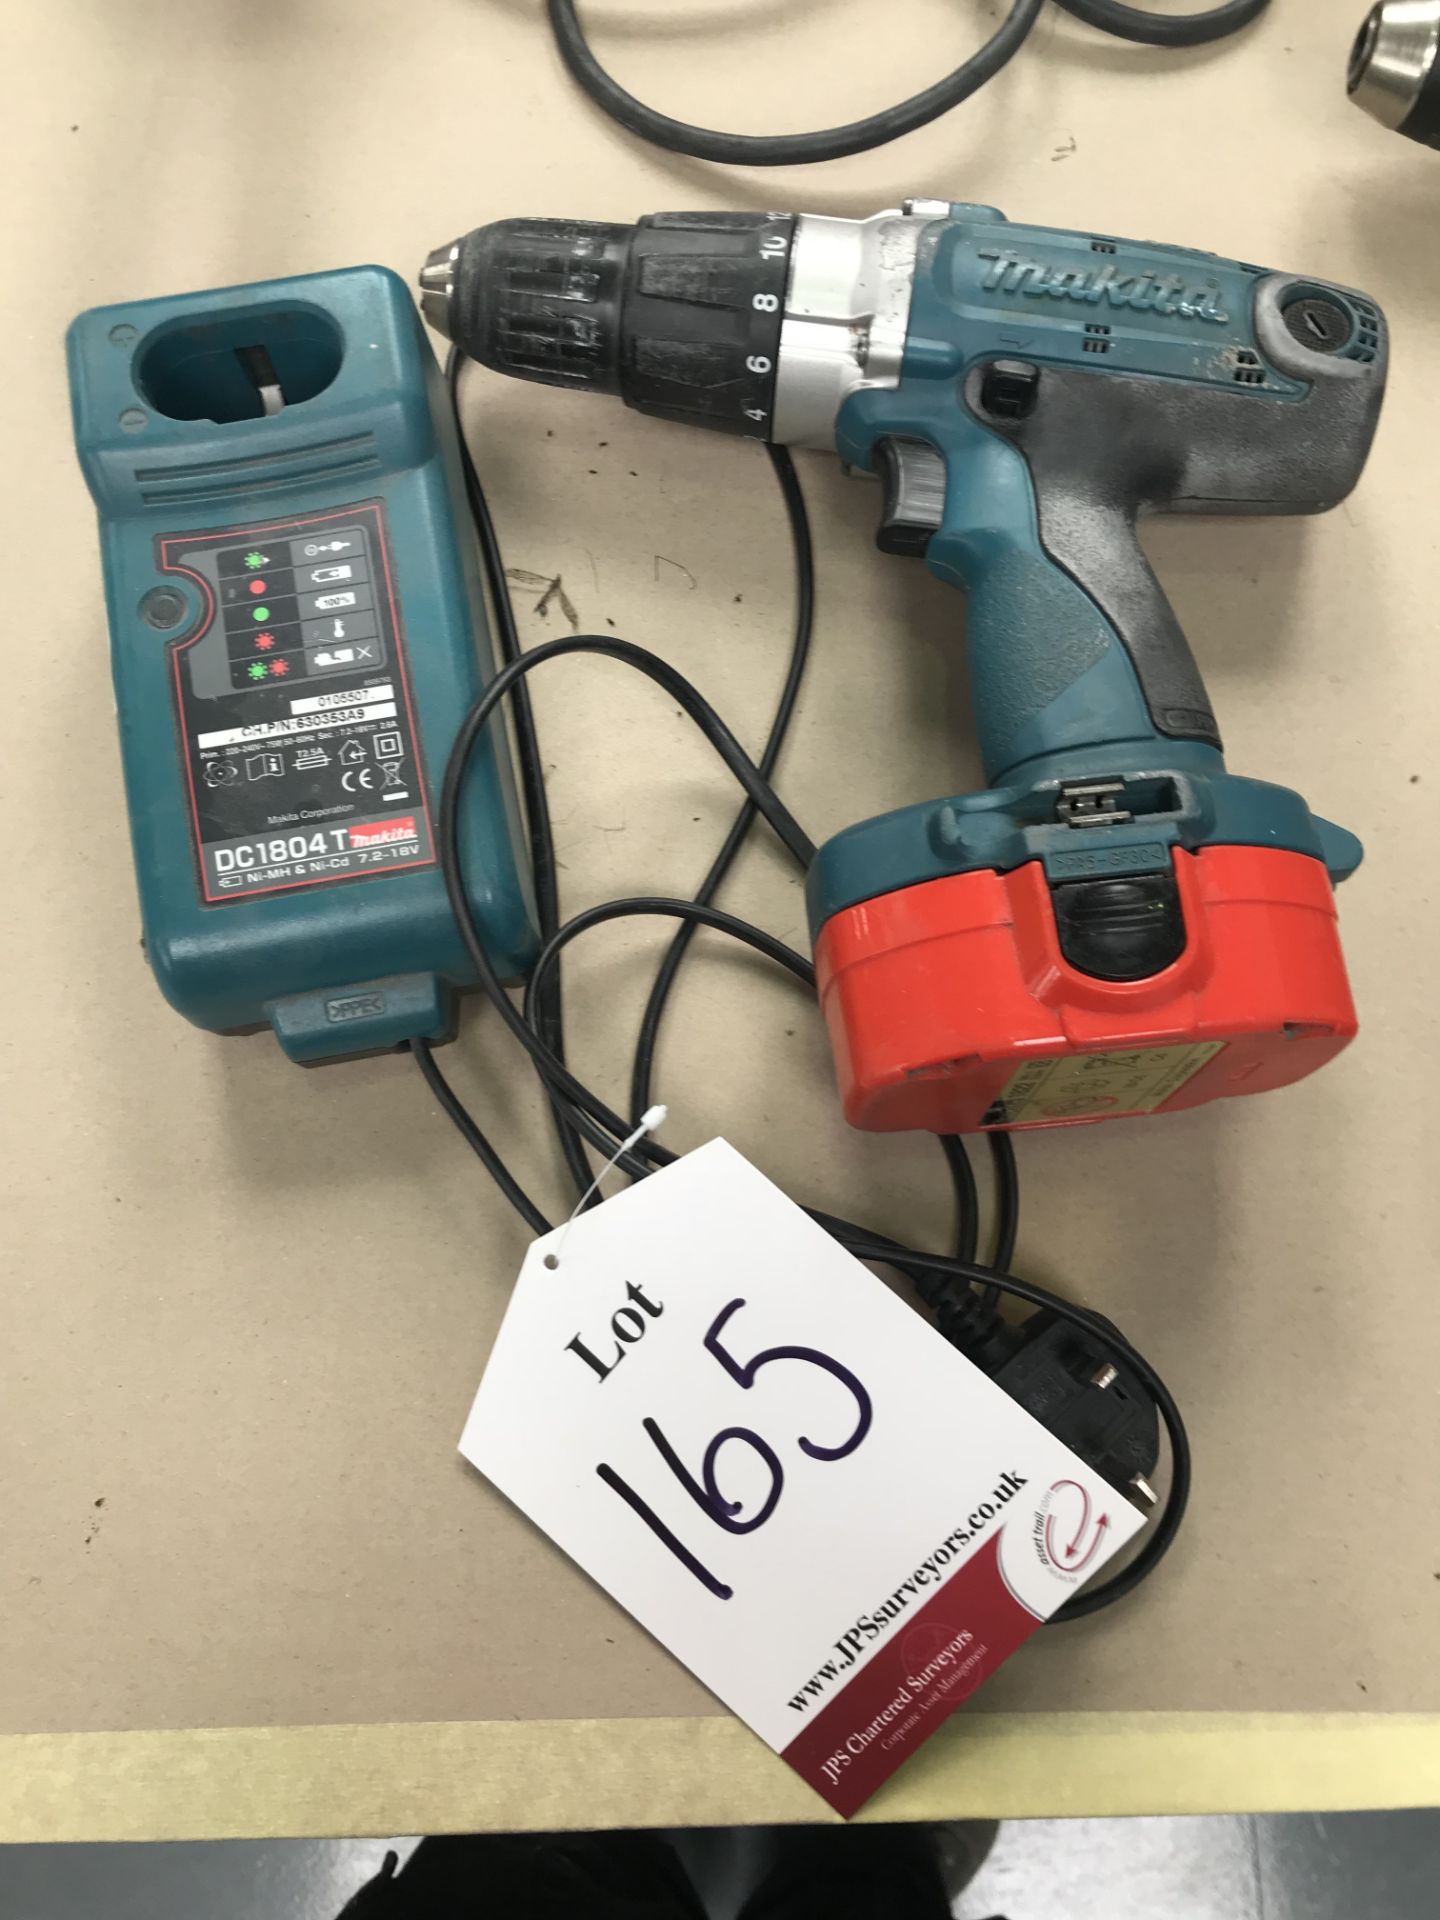 Makita Power Drill w/ Charging Station - No sticker for model